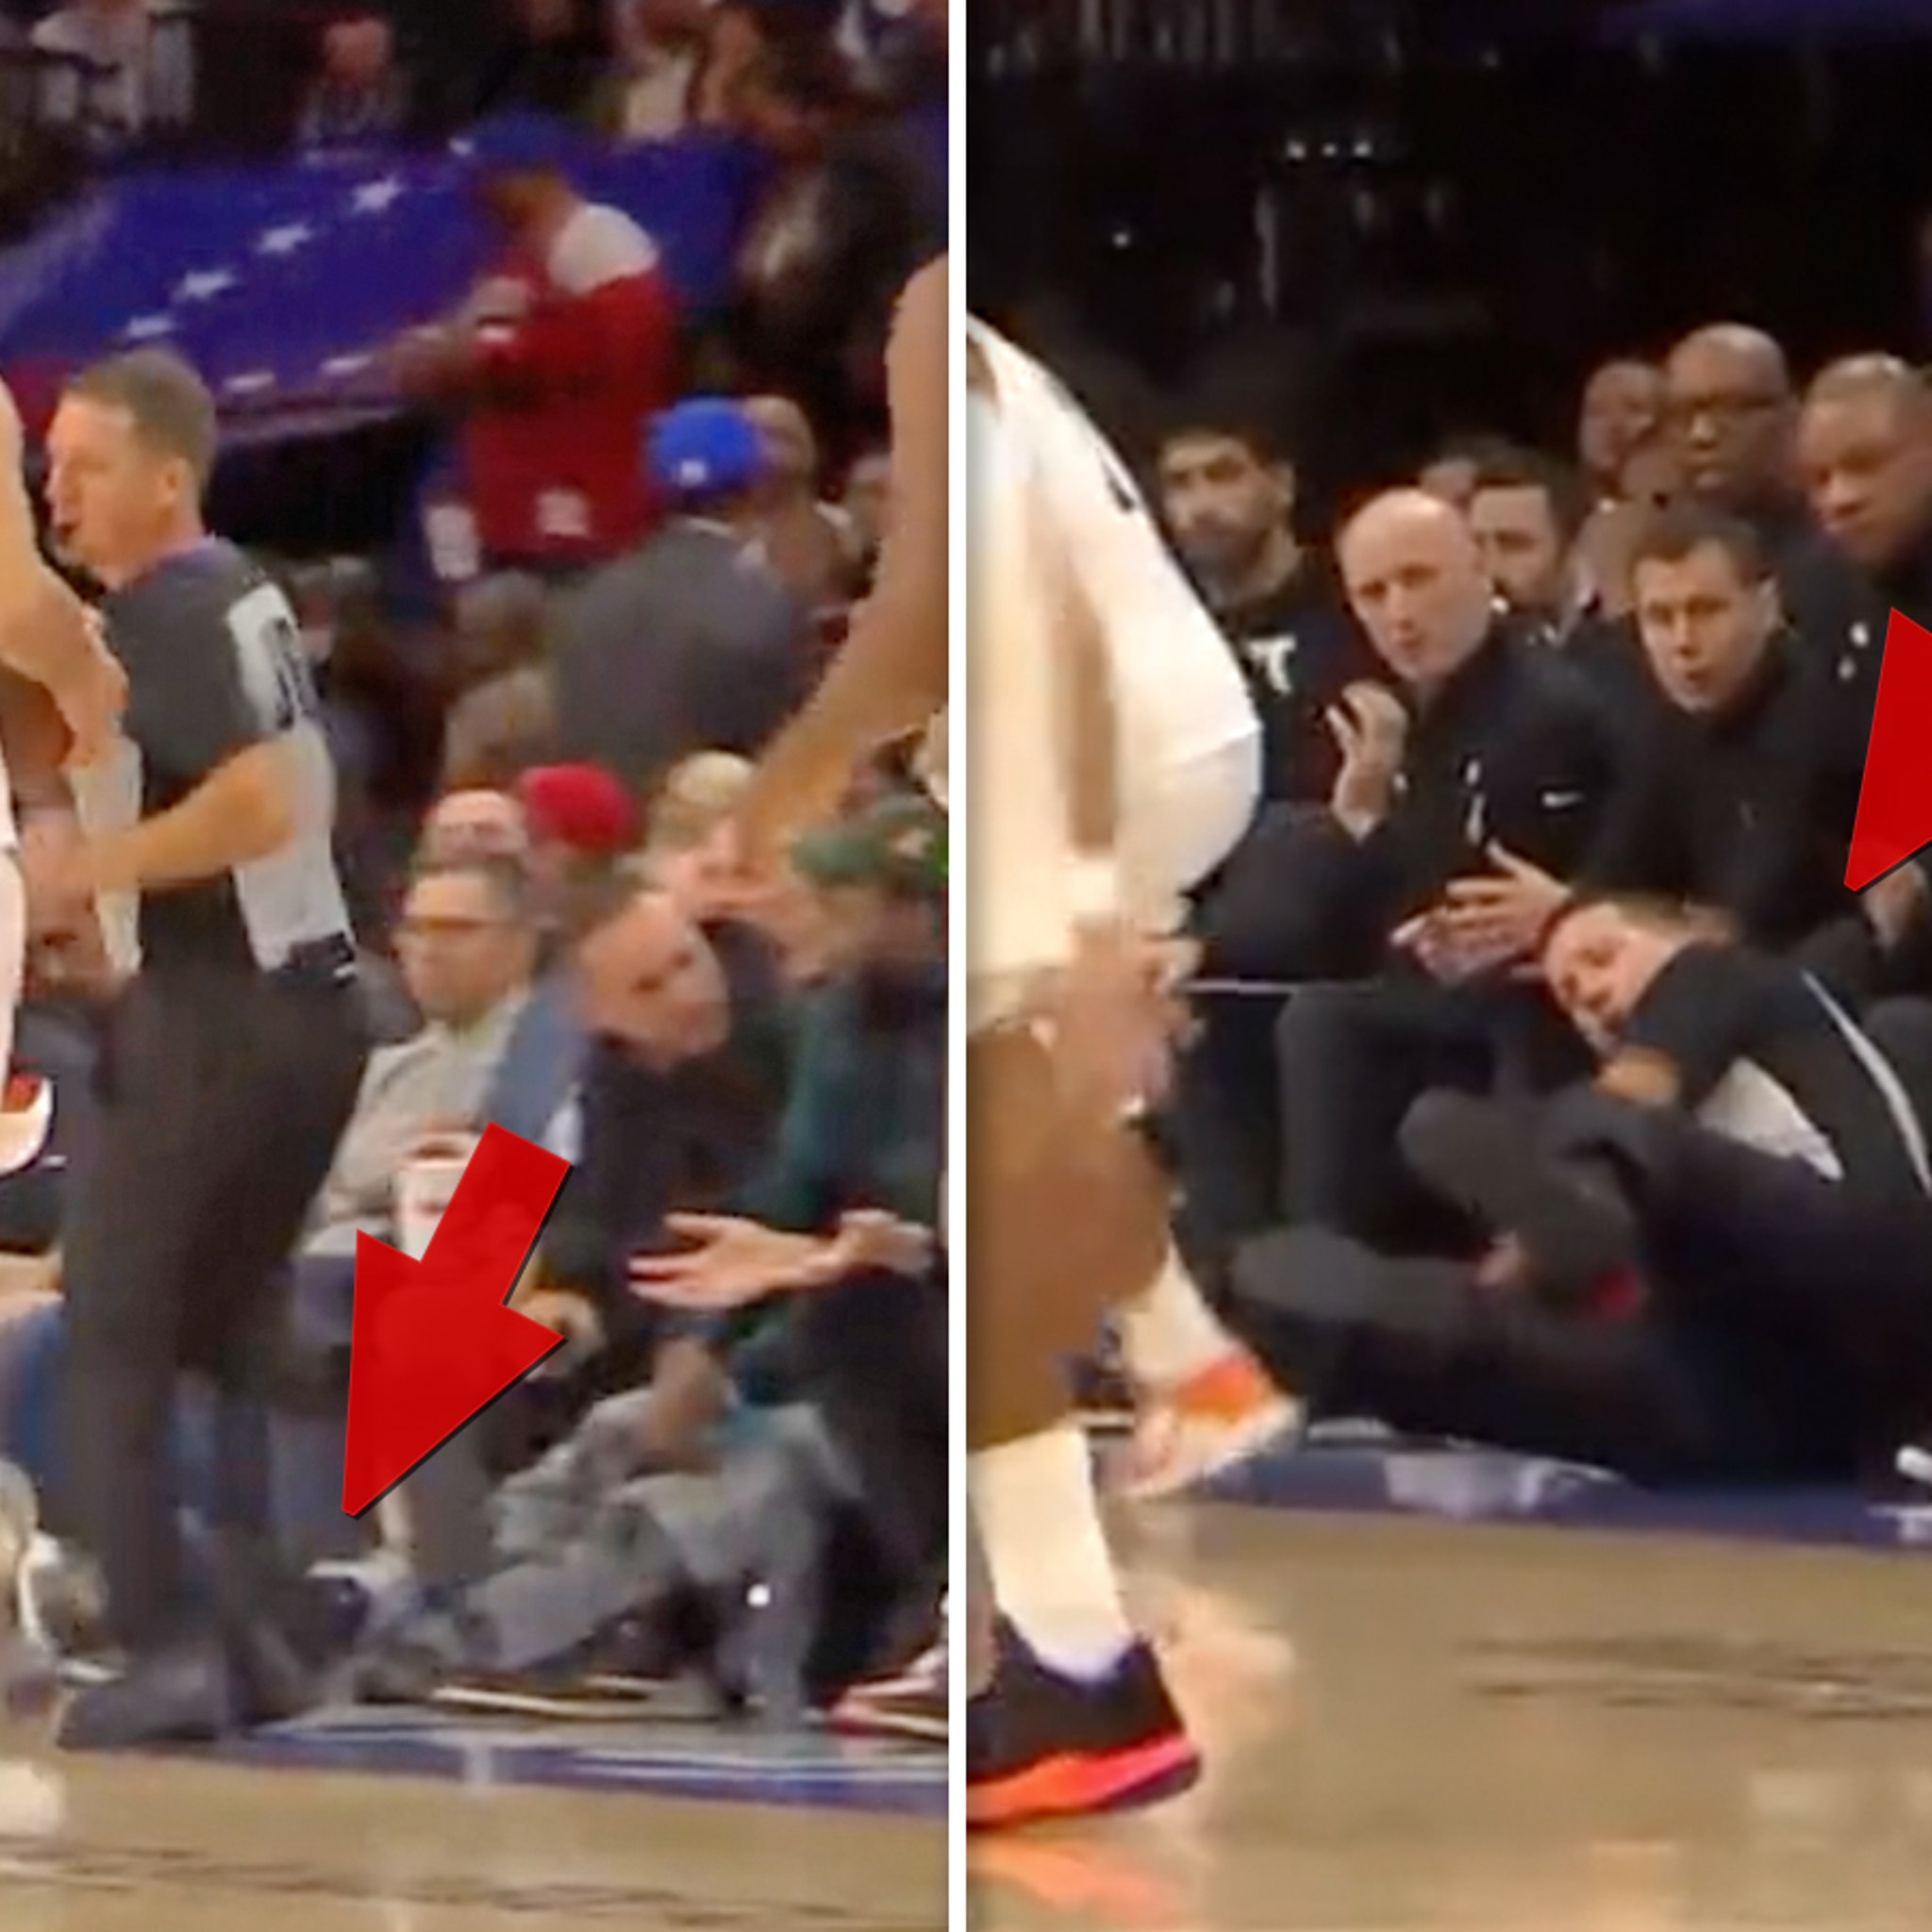 Meek Mill Trips Referee at Sixers Game, Issues Apology - Rap-Up